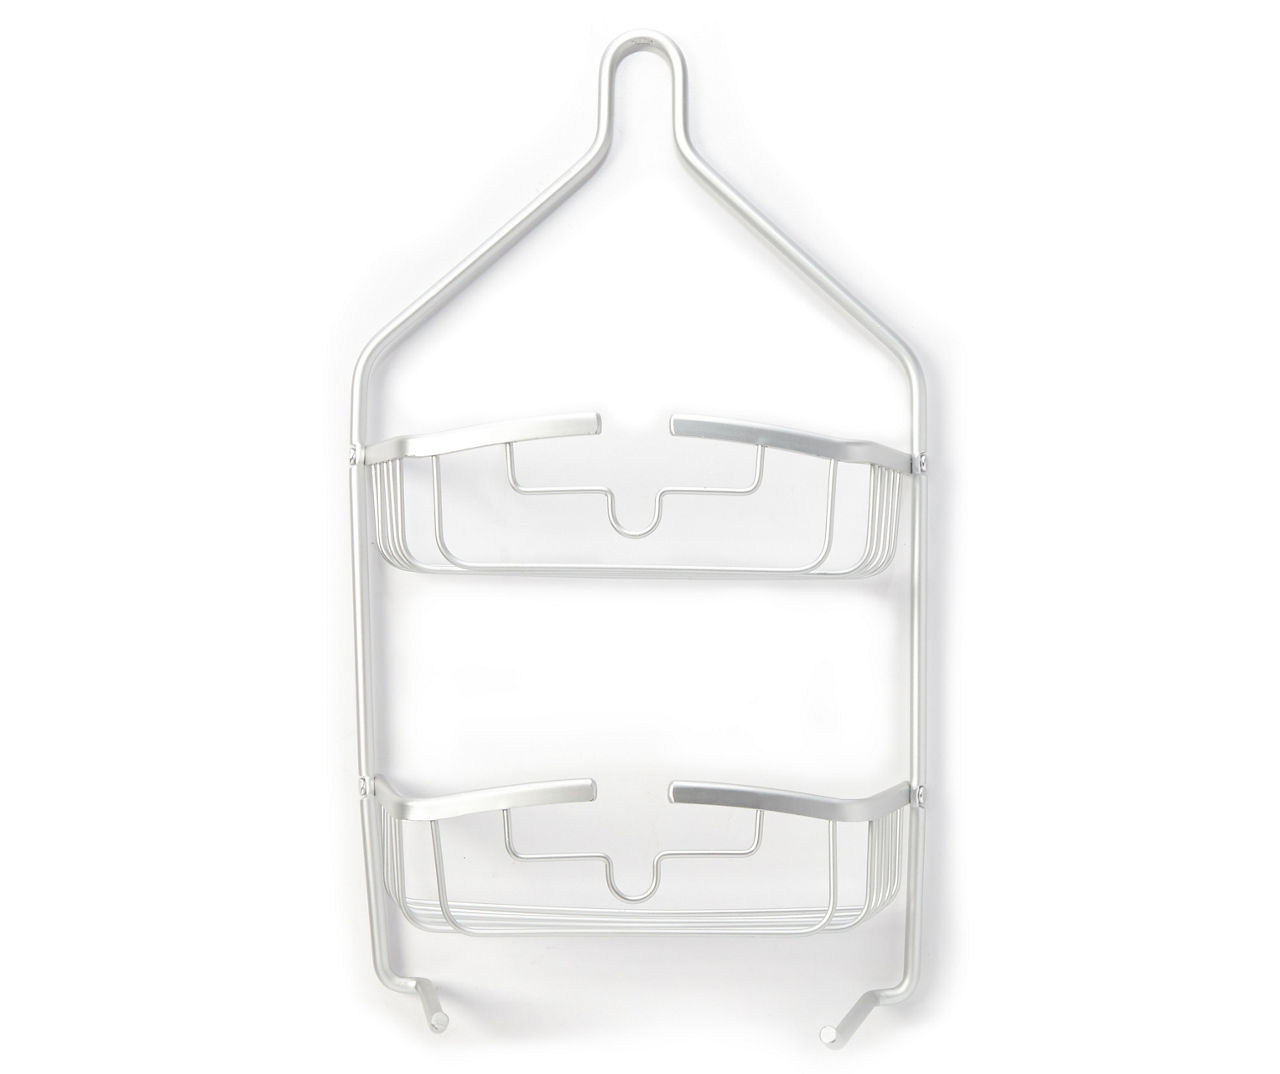 Plastic Shower Caddy Over Shower Head Hanging Shower Caddy with